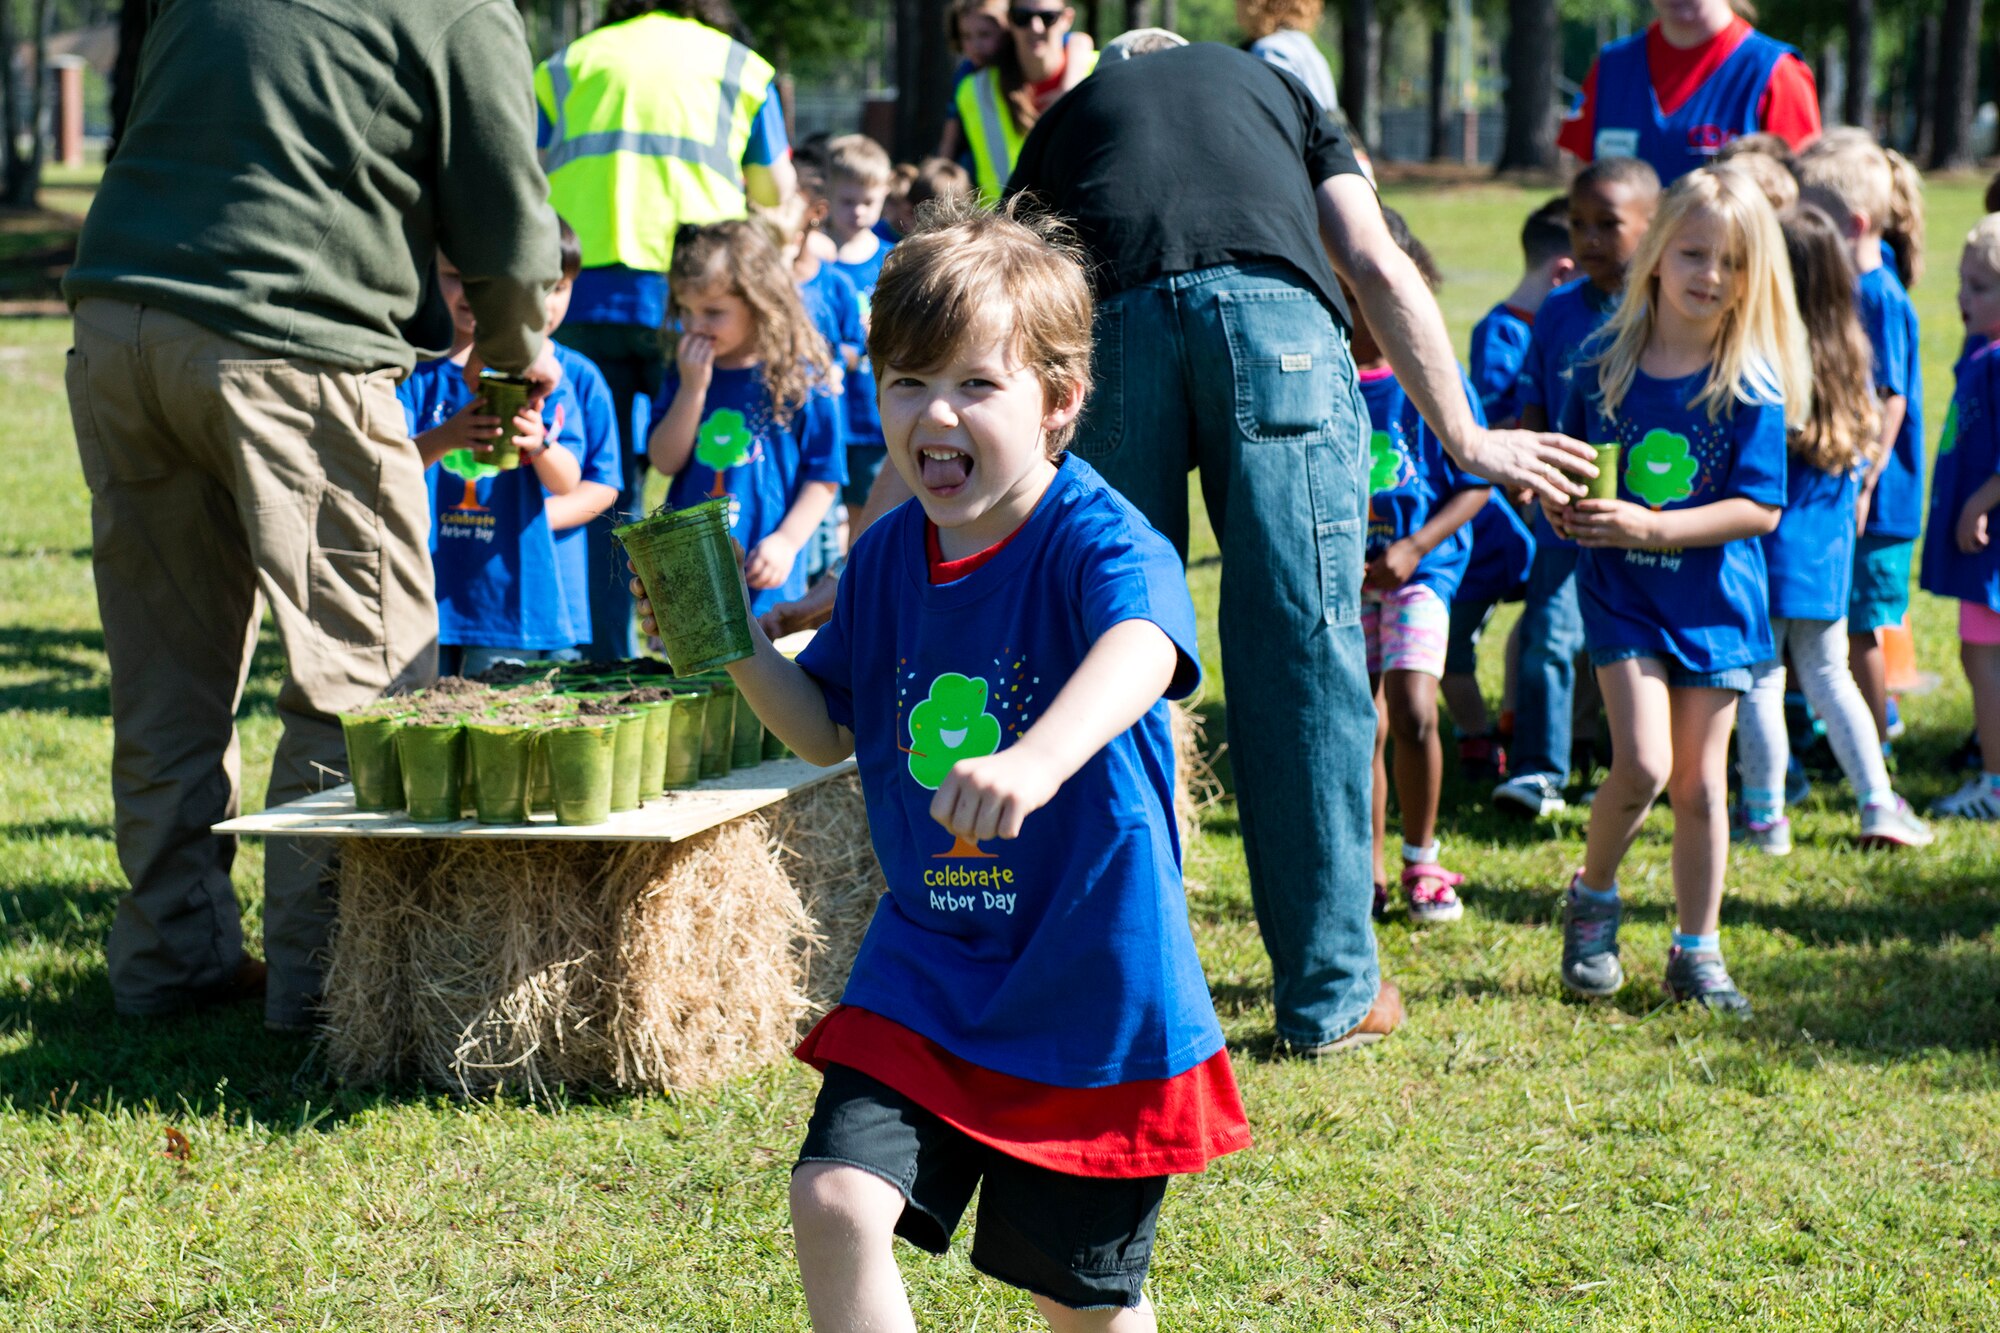 A child from Moody’s child development center brings dirt to an oak tree hole during Arbor Day, April 27, 2018, at Moody Air Force Base, Ga. Moody annually celebrates the holiday which encourages the benefits of planting trees. For 19 years the base has been a part of the Tree City USA Program by the National Arbor Day Foundation, to better prepare for the future of caring for their Airmen through improved ecological sustainability. (U.S. Air Force photo by Airman 1st Class Erick Requadt)